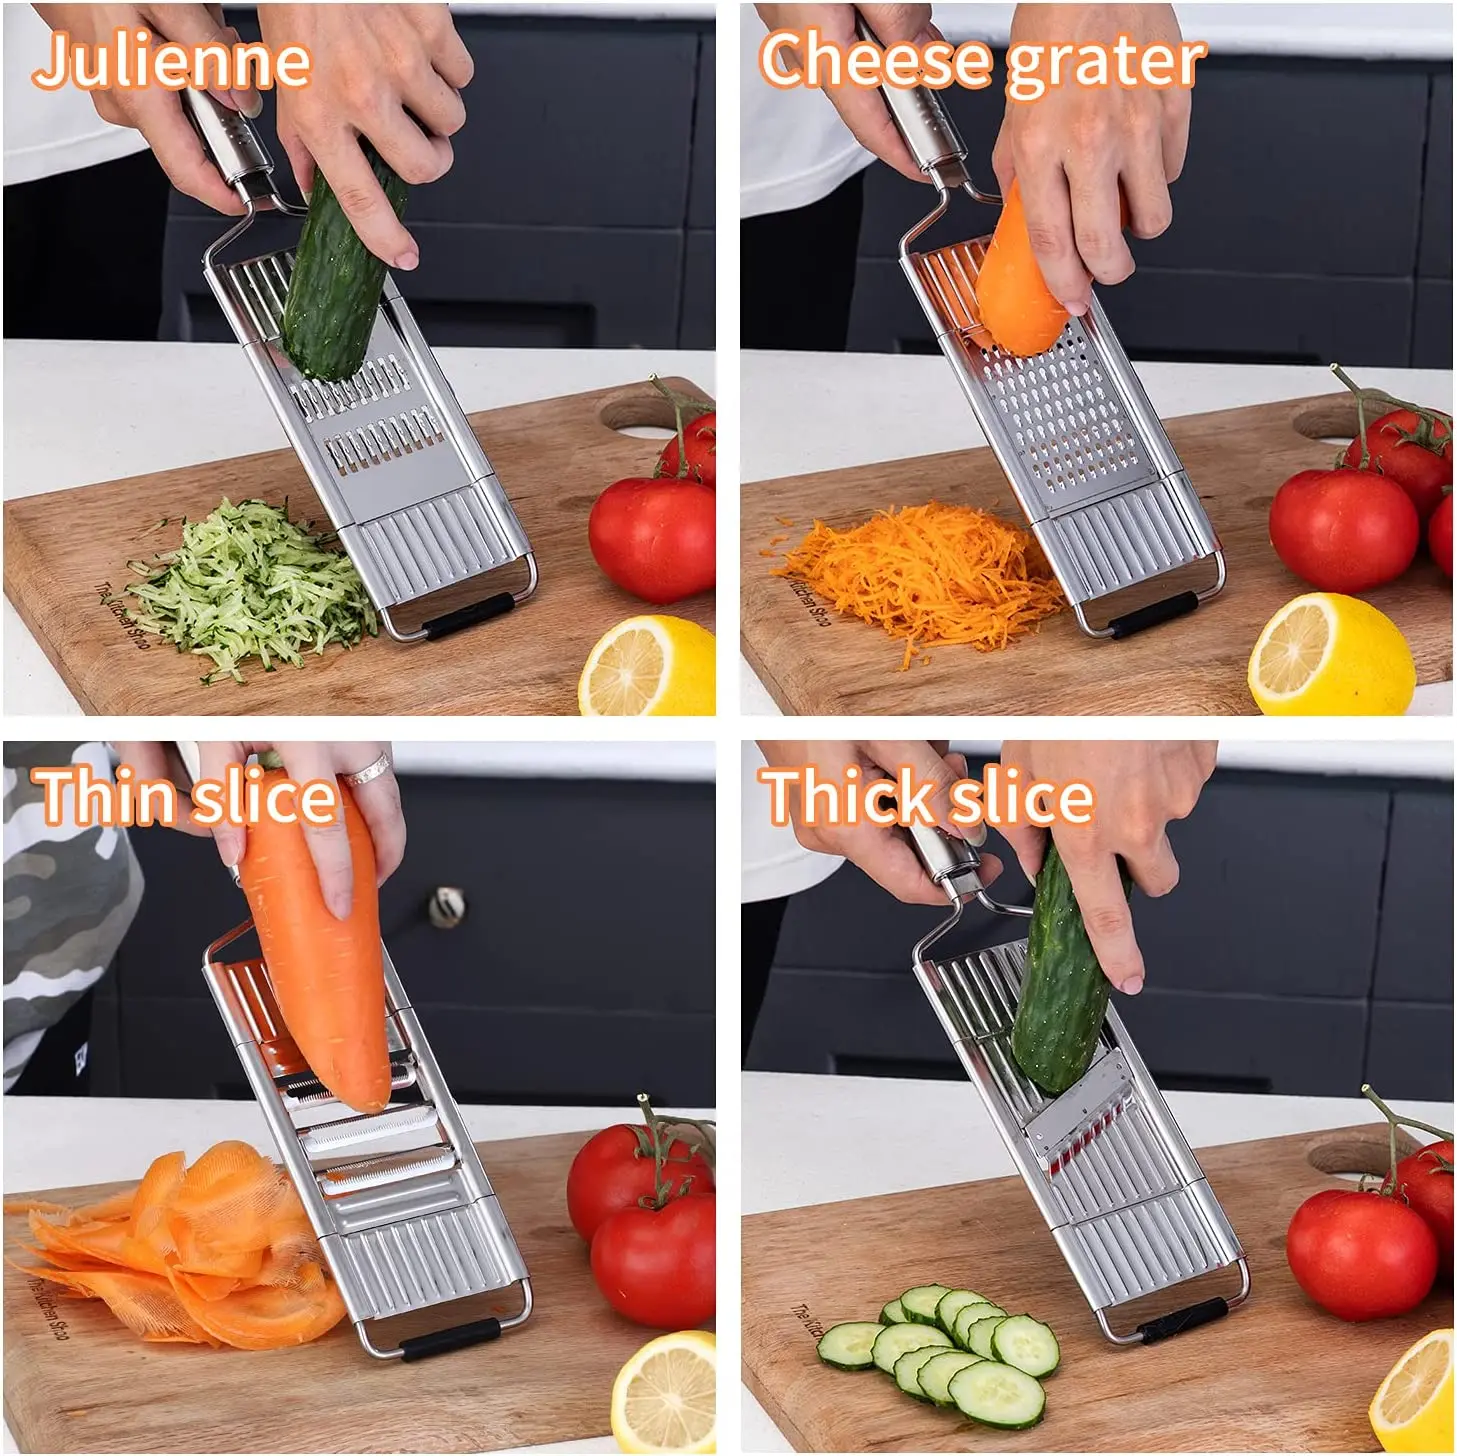 The New 4 in 1 Upgrade Multi-Purpose Vegetable Slicer Cheese Grater Stainless Steel Kitchen Tool Vegetable Cutter